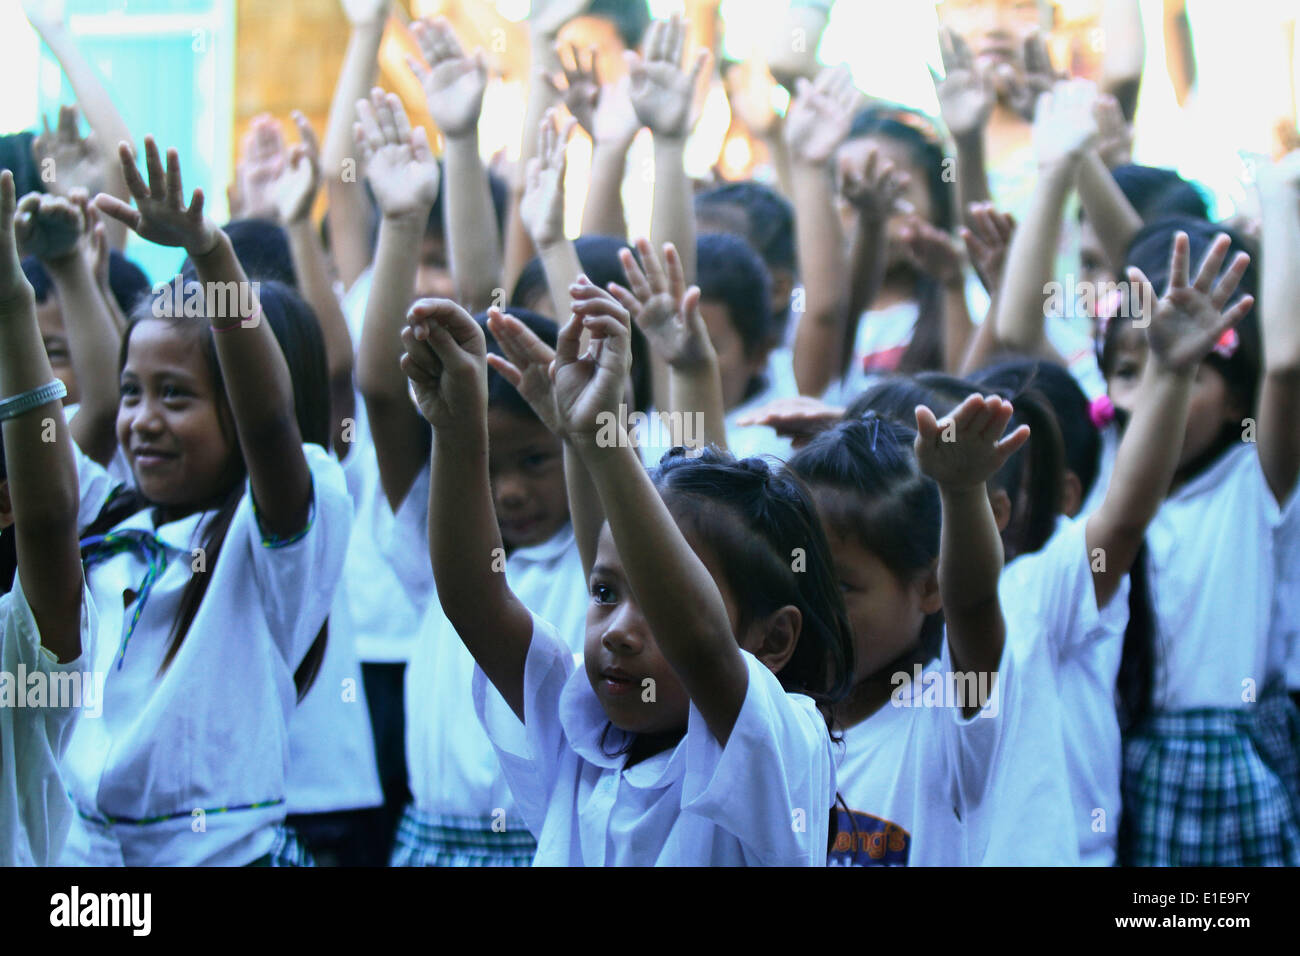 Rizal Province, Philippines. 2nd June, 2014. Students raise their hands at a remote elementary school in Rizal Province, the Philippines, June 2, 2014. More than 23 million students returned to school on Monday for the first day of classes for the school year of 2014-2015. © Rouelle Umali/Xinhua/Alamy Live News Stock Photo